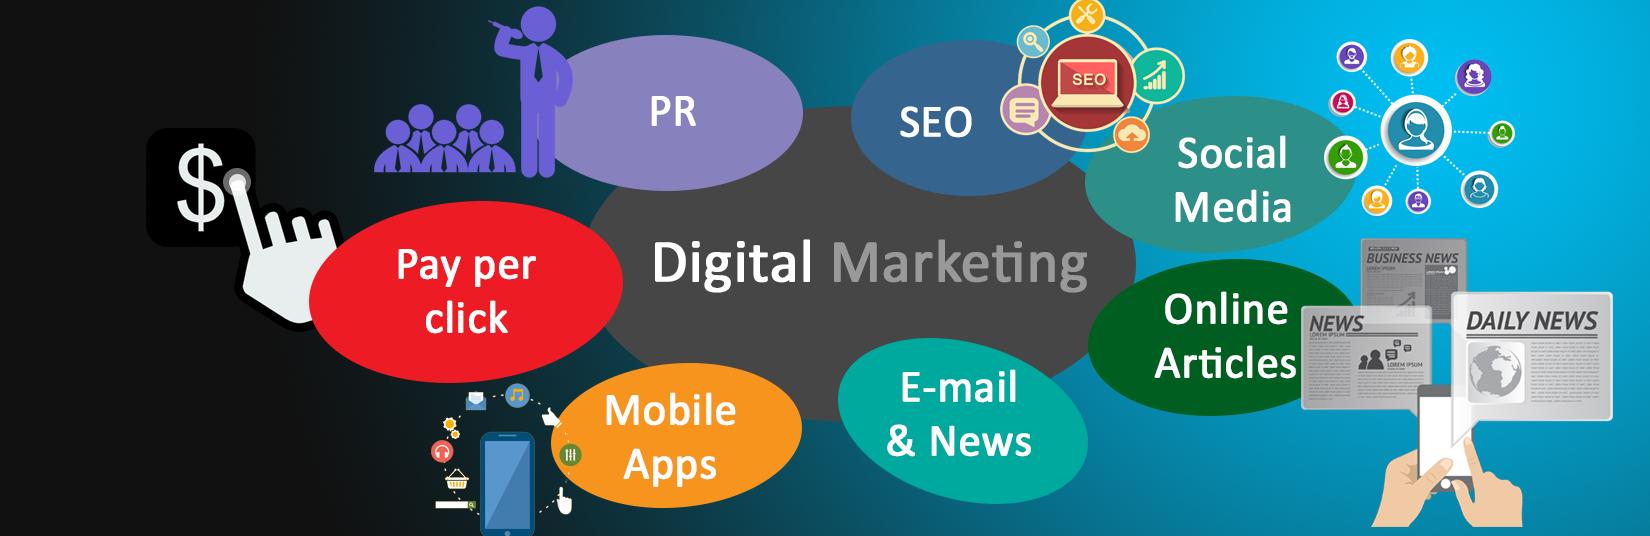 What Are the Main Benefits of Digital Marketing? | Abhiseo